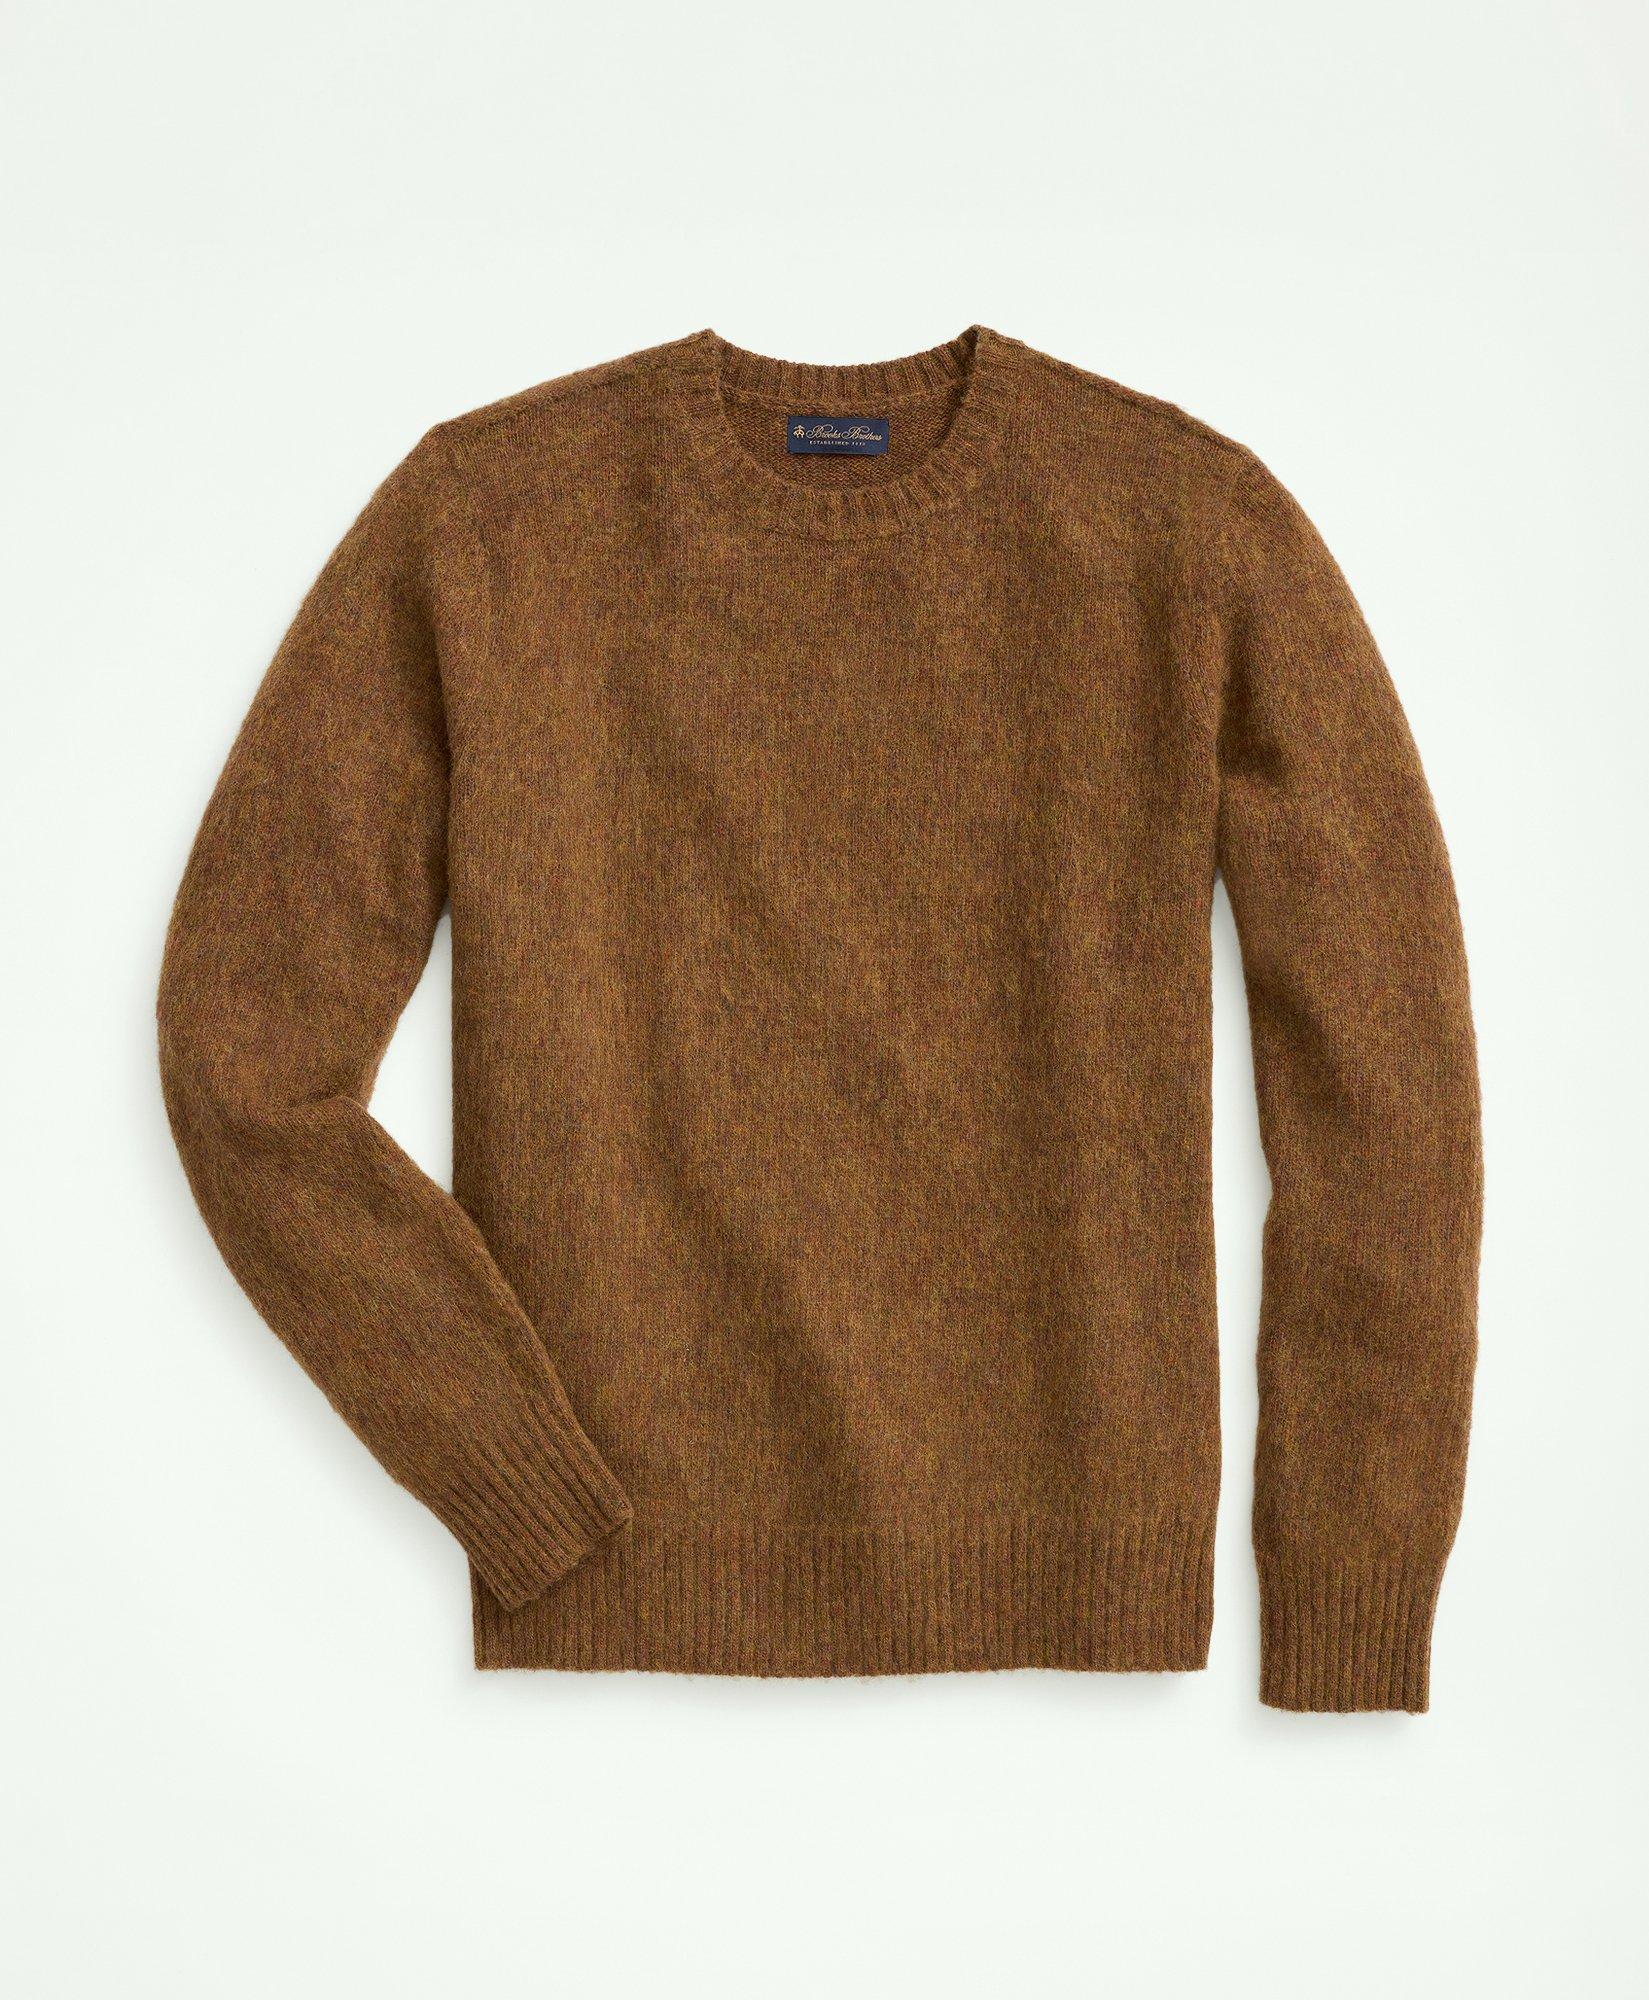 Brooks Brothers Men's Brushed Wool Raglan Crewneck Sweater | Rust | Size Medium - Shop Holiday Gifts and Styles